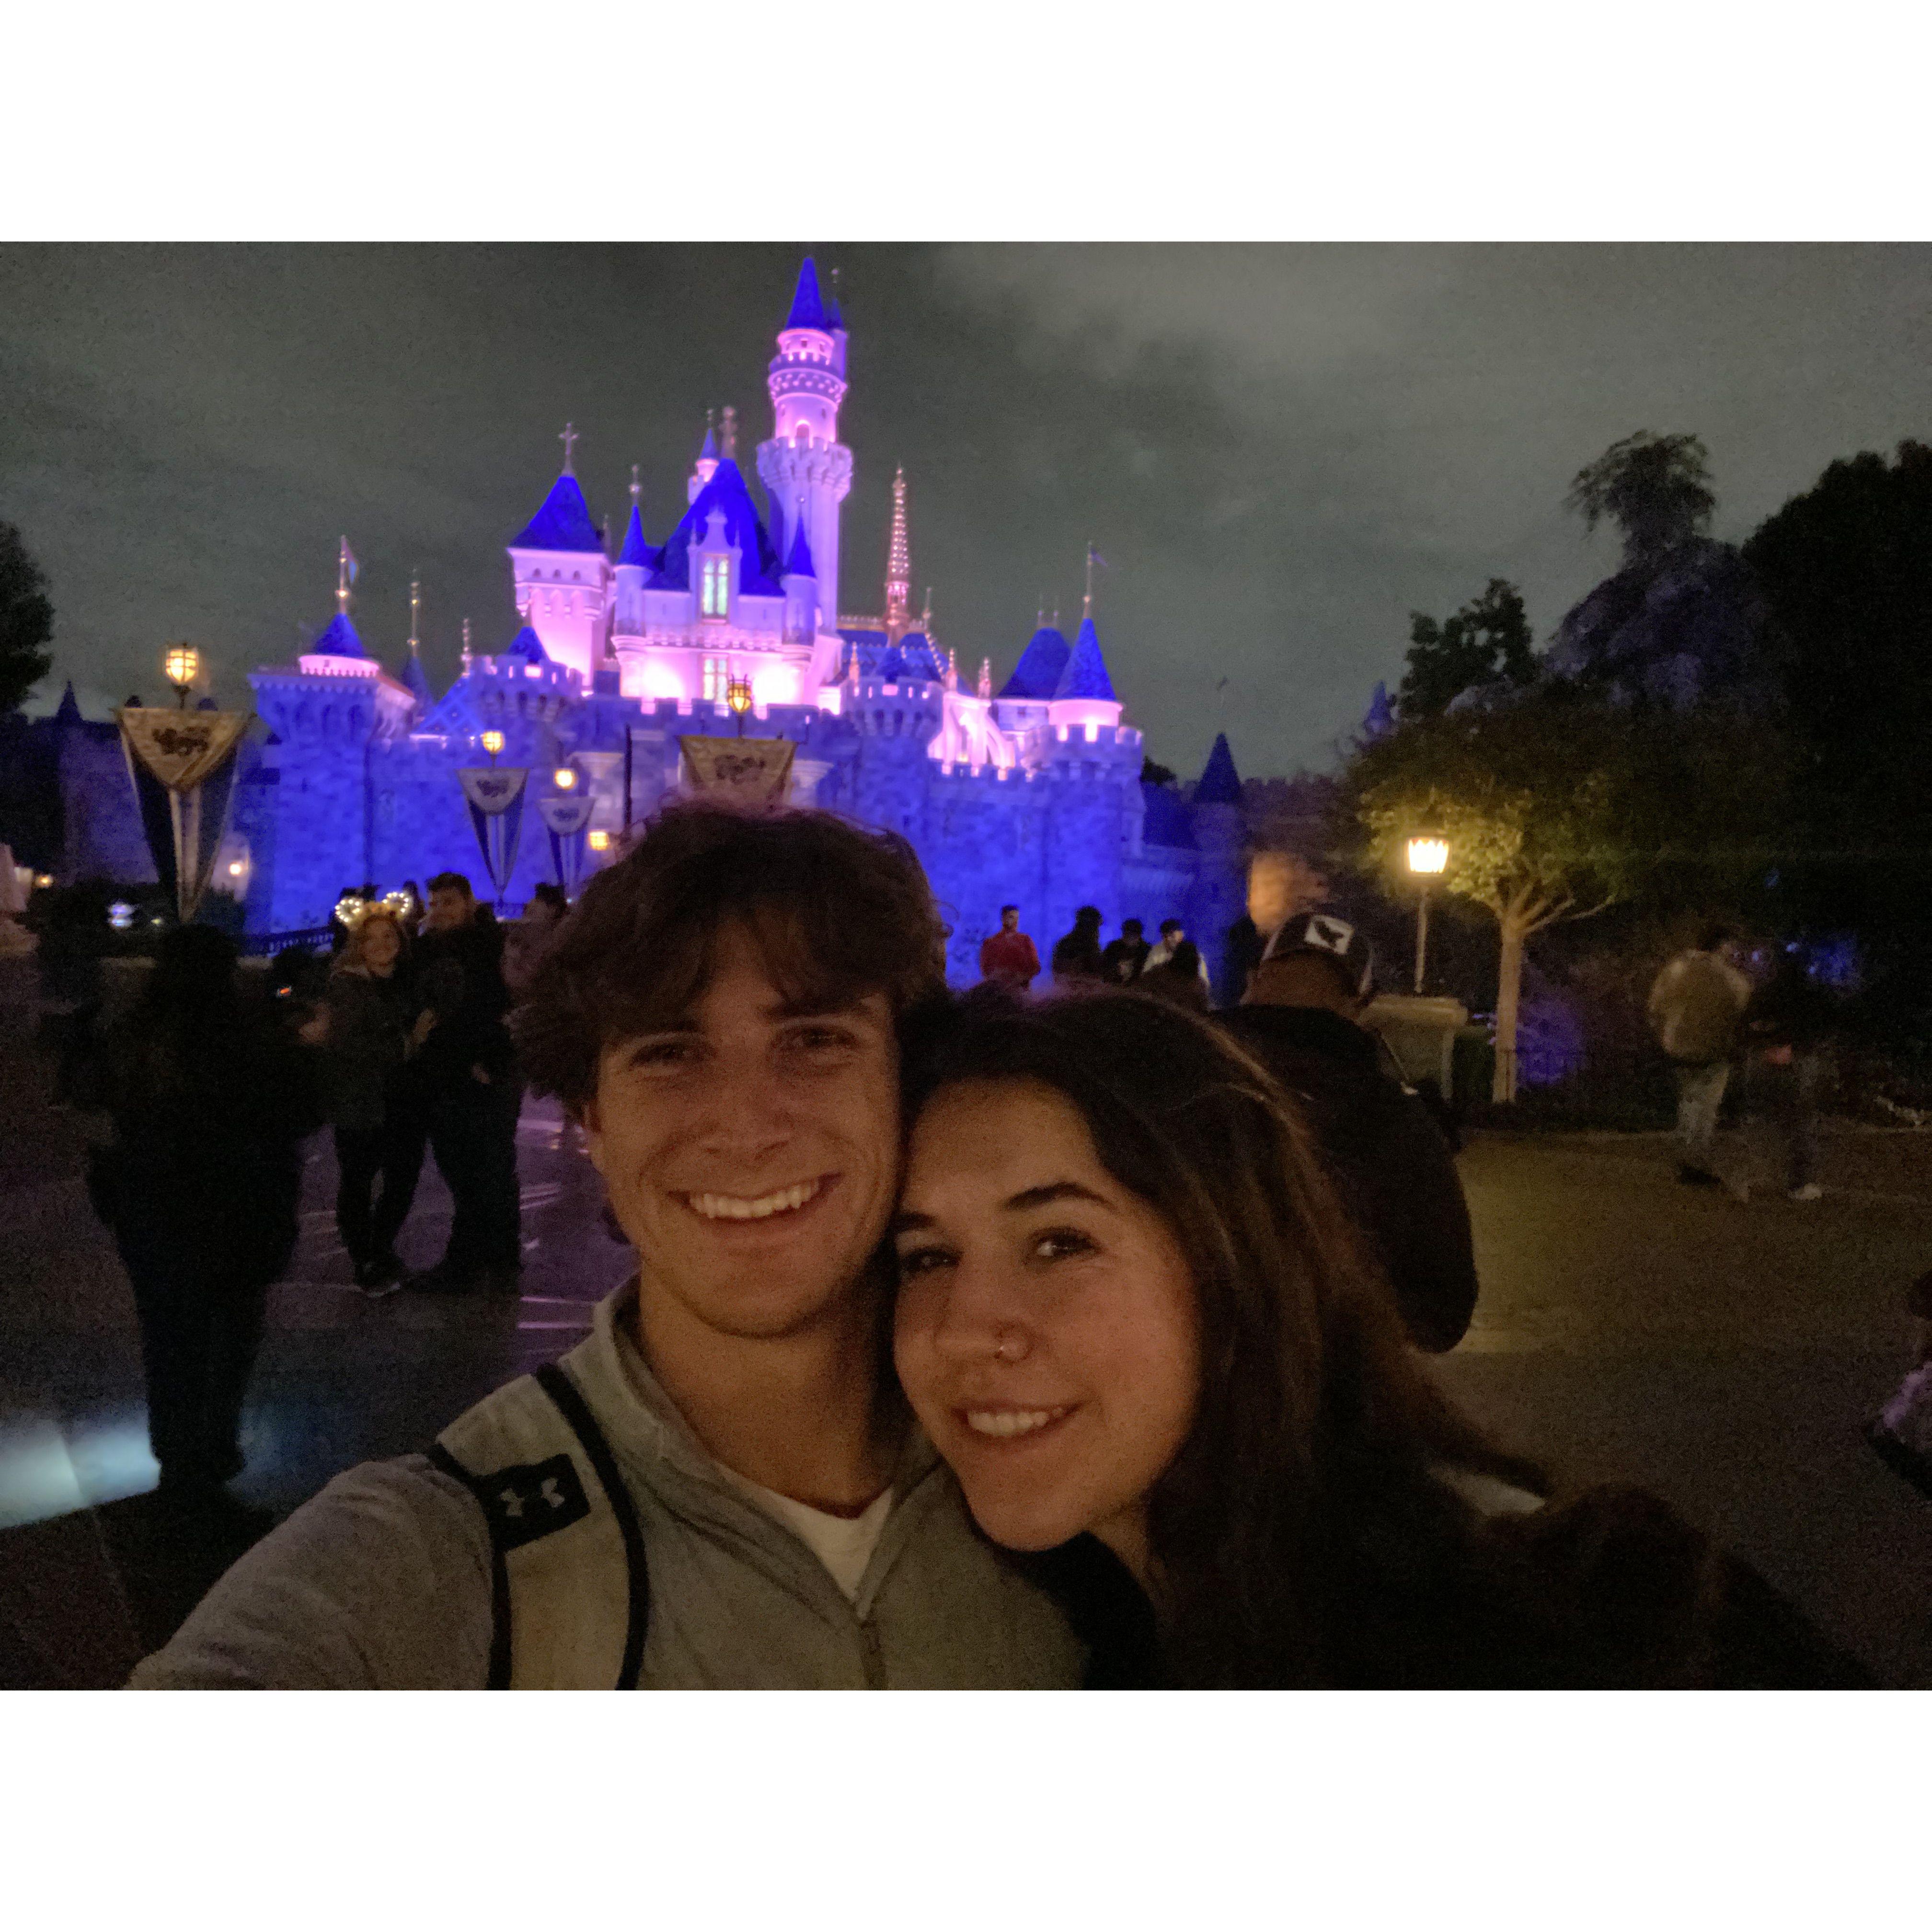 Another Disney date